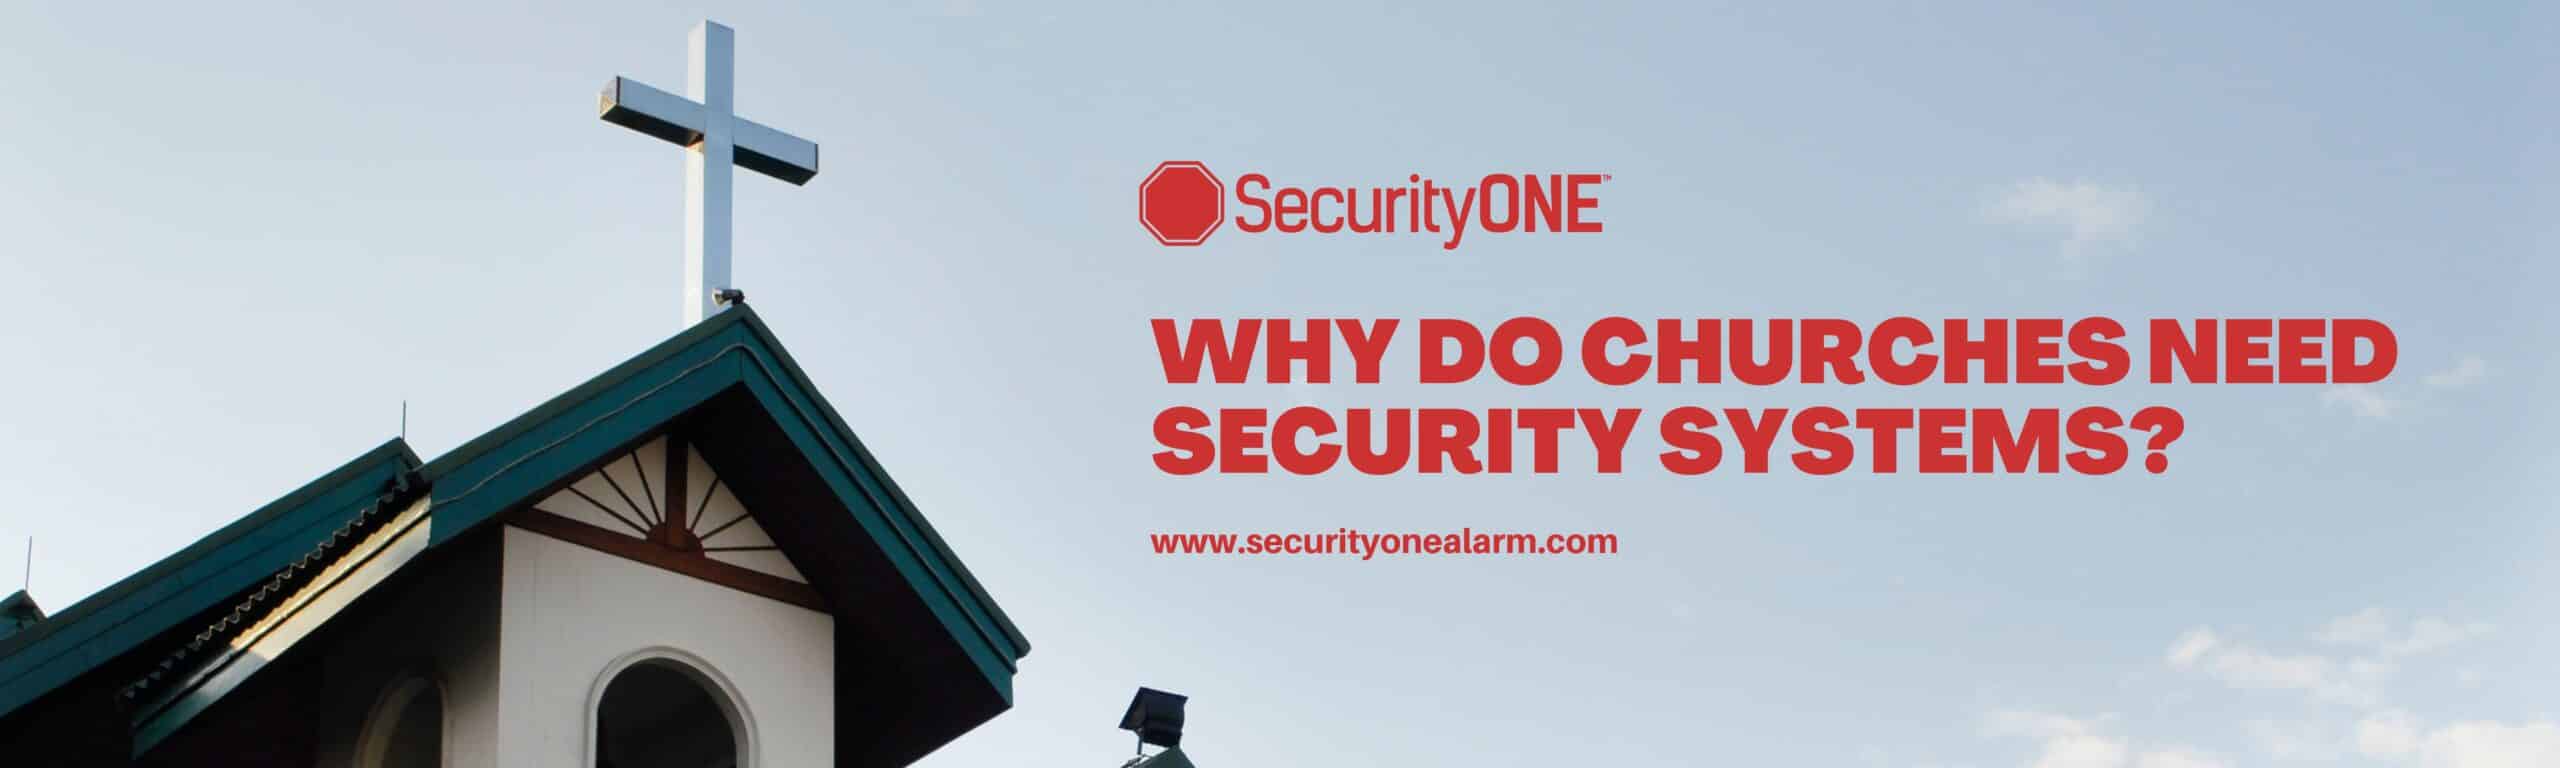 WHY DO CHURCHES NEED SECURITY SYSTEM